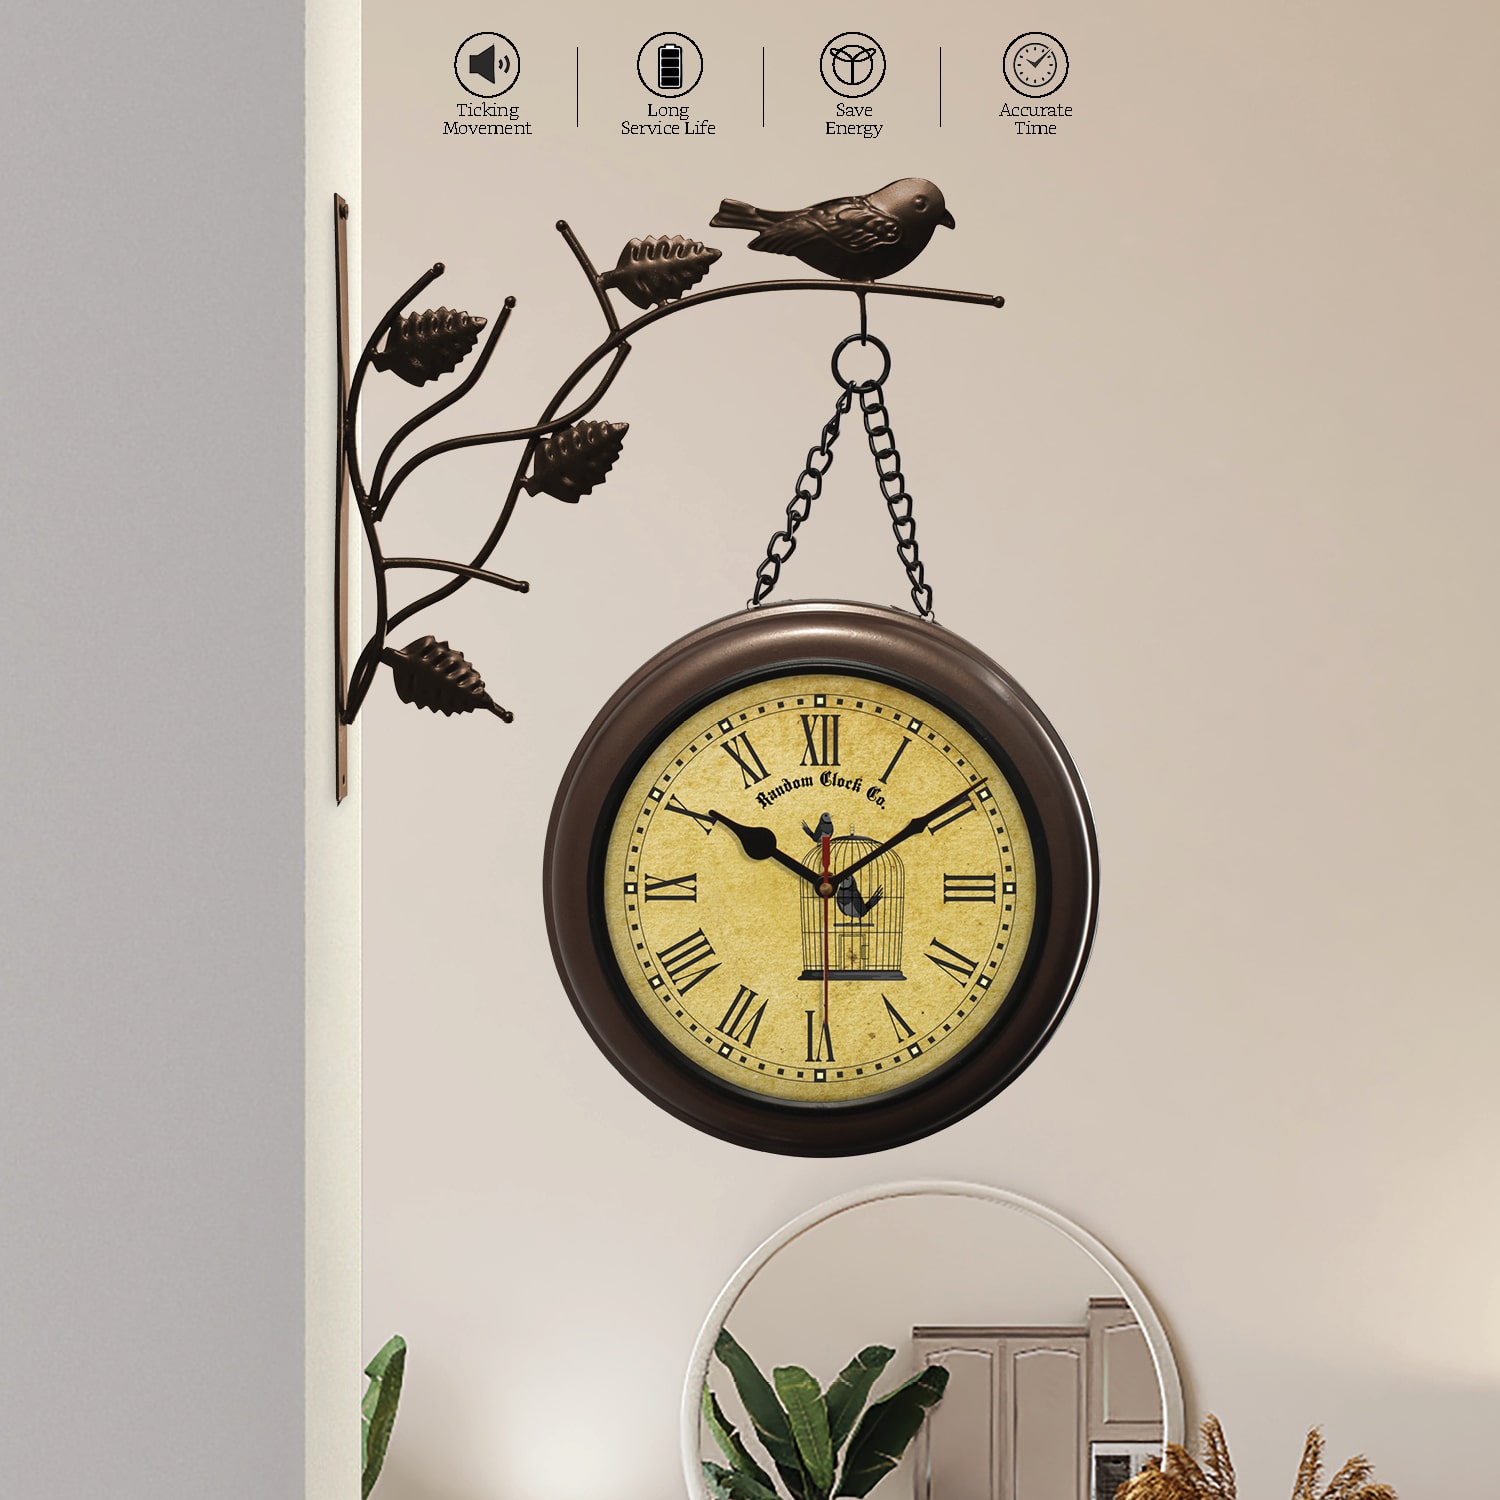  Time Flies in Style with a Stylish Table Clock